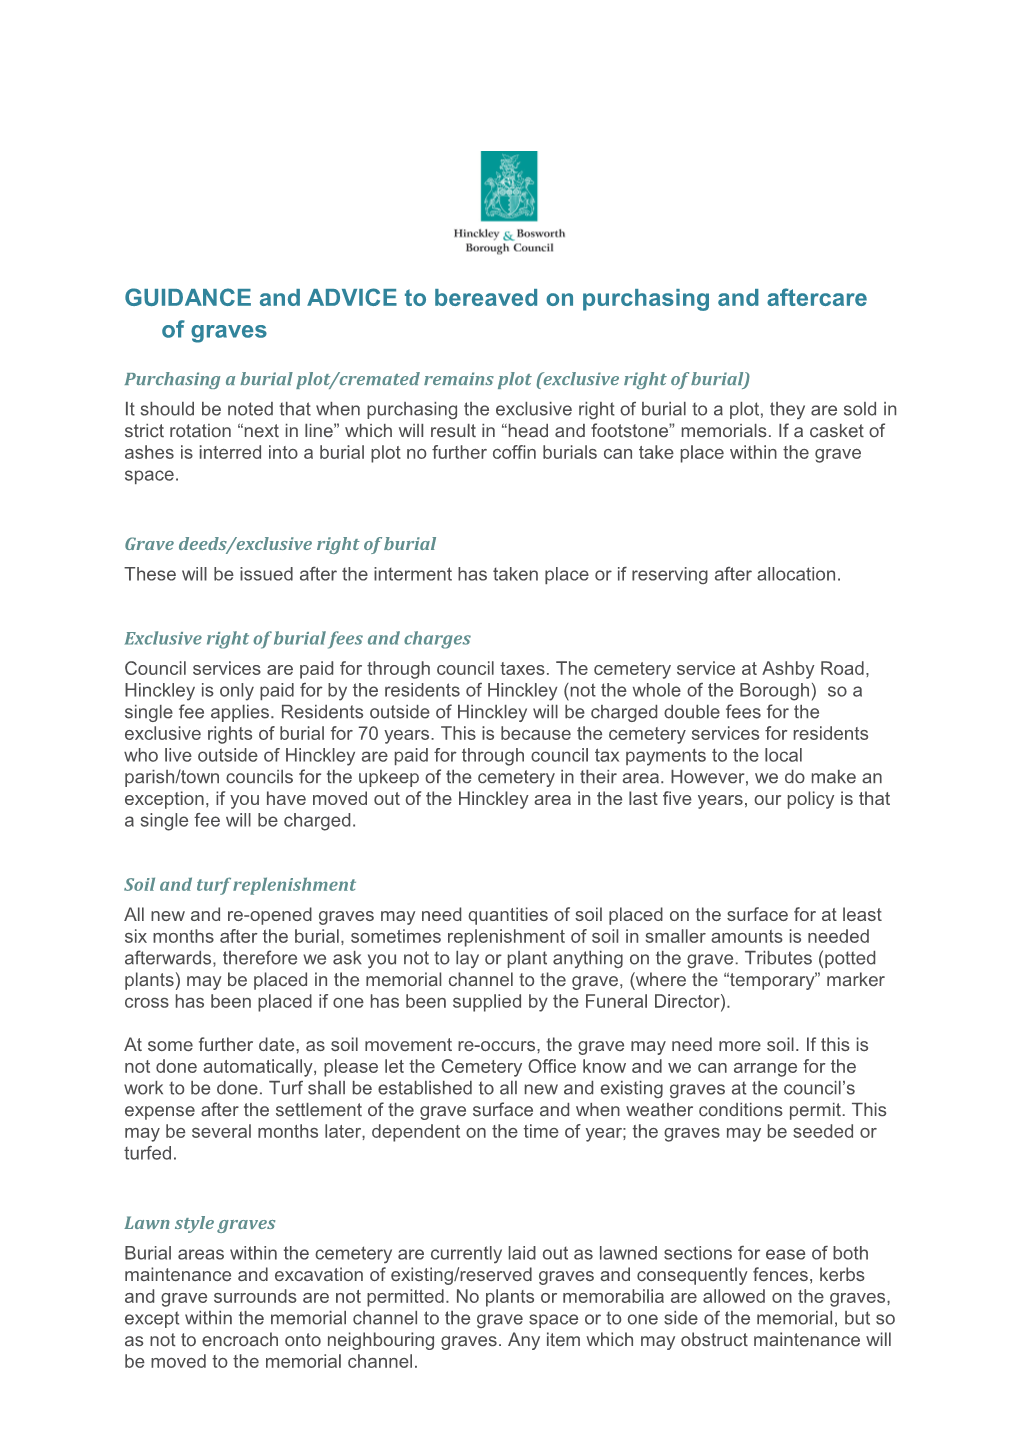 GUIDANCE and ADVICE to Bereaved on Purchasing and Aftercare of Graves